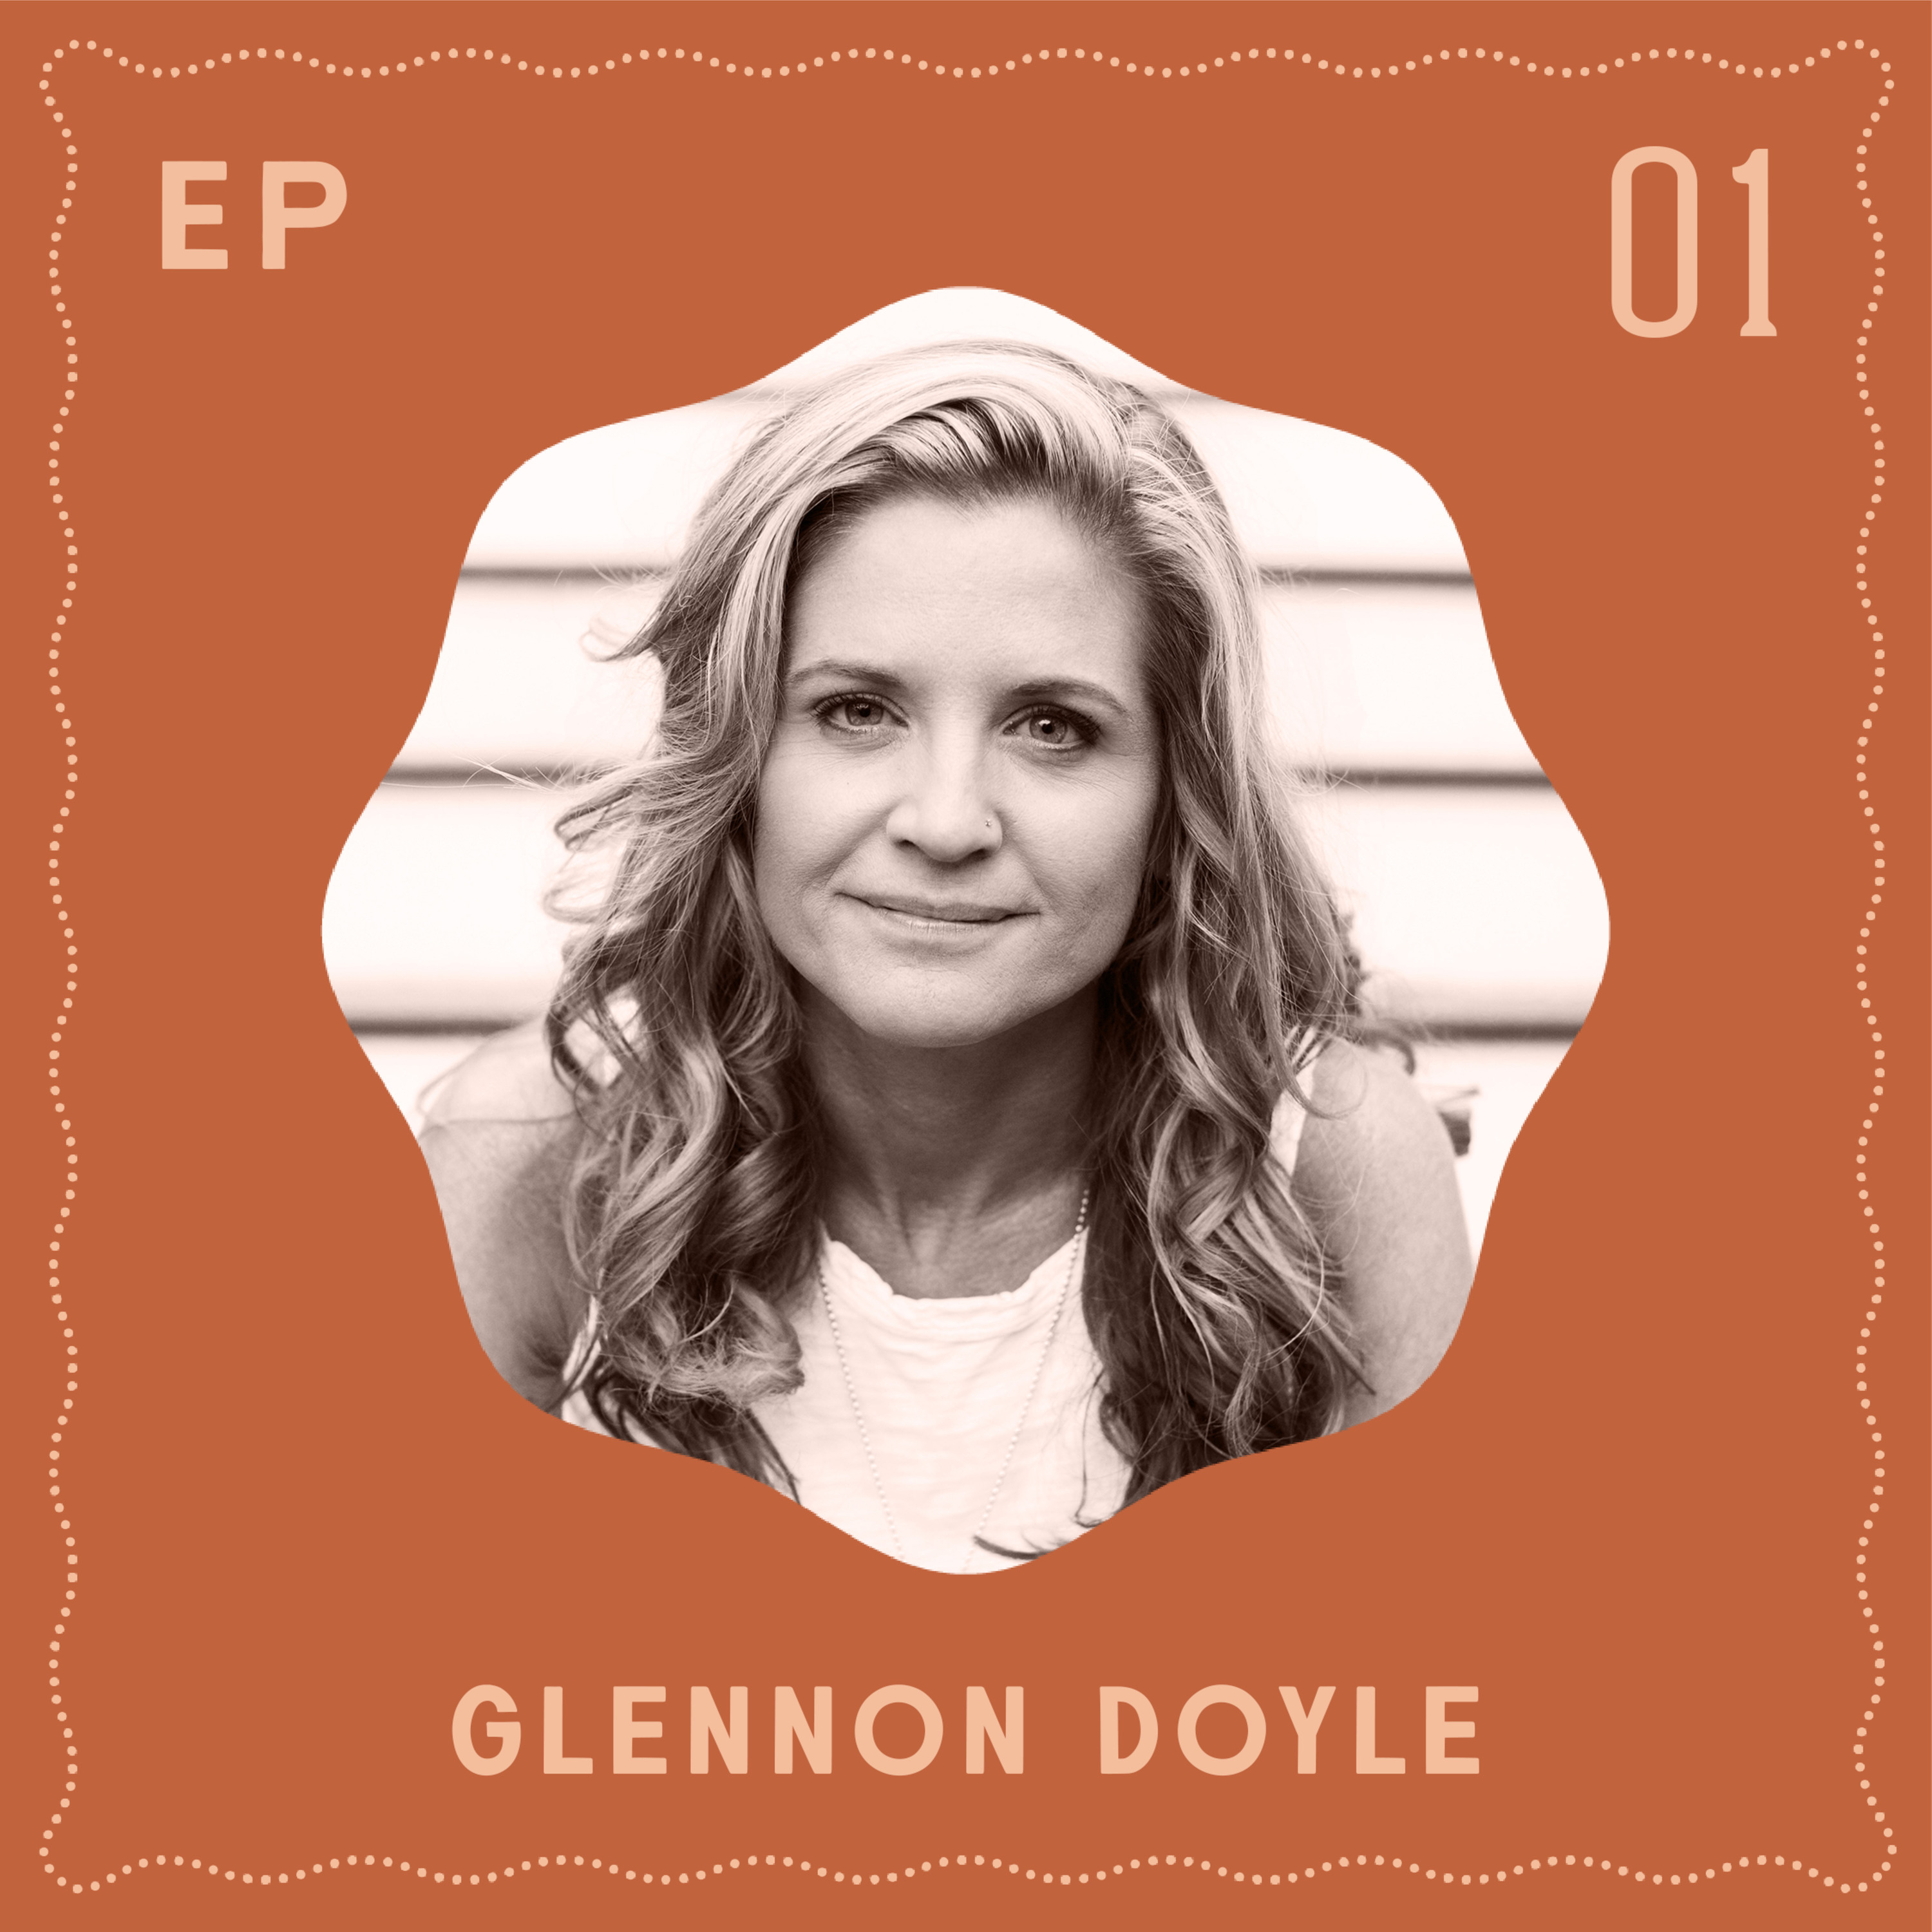 Glennon Doyle is trying to figure out life in quarantine, too